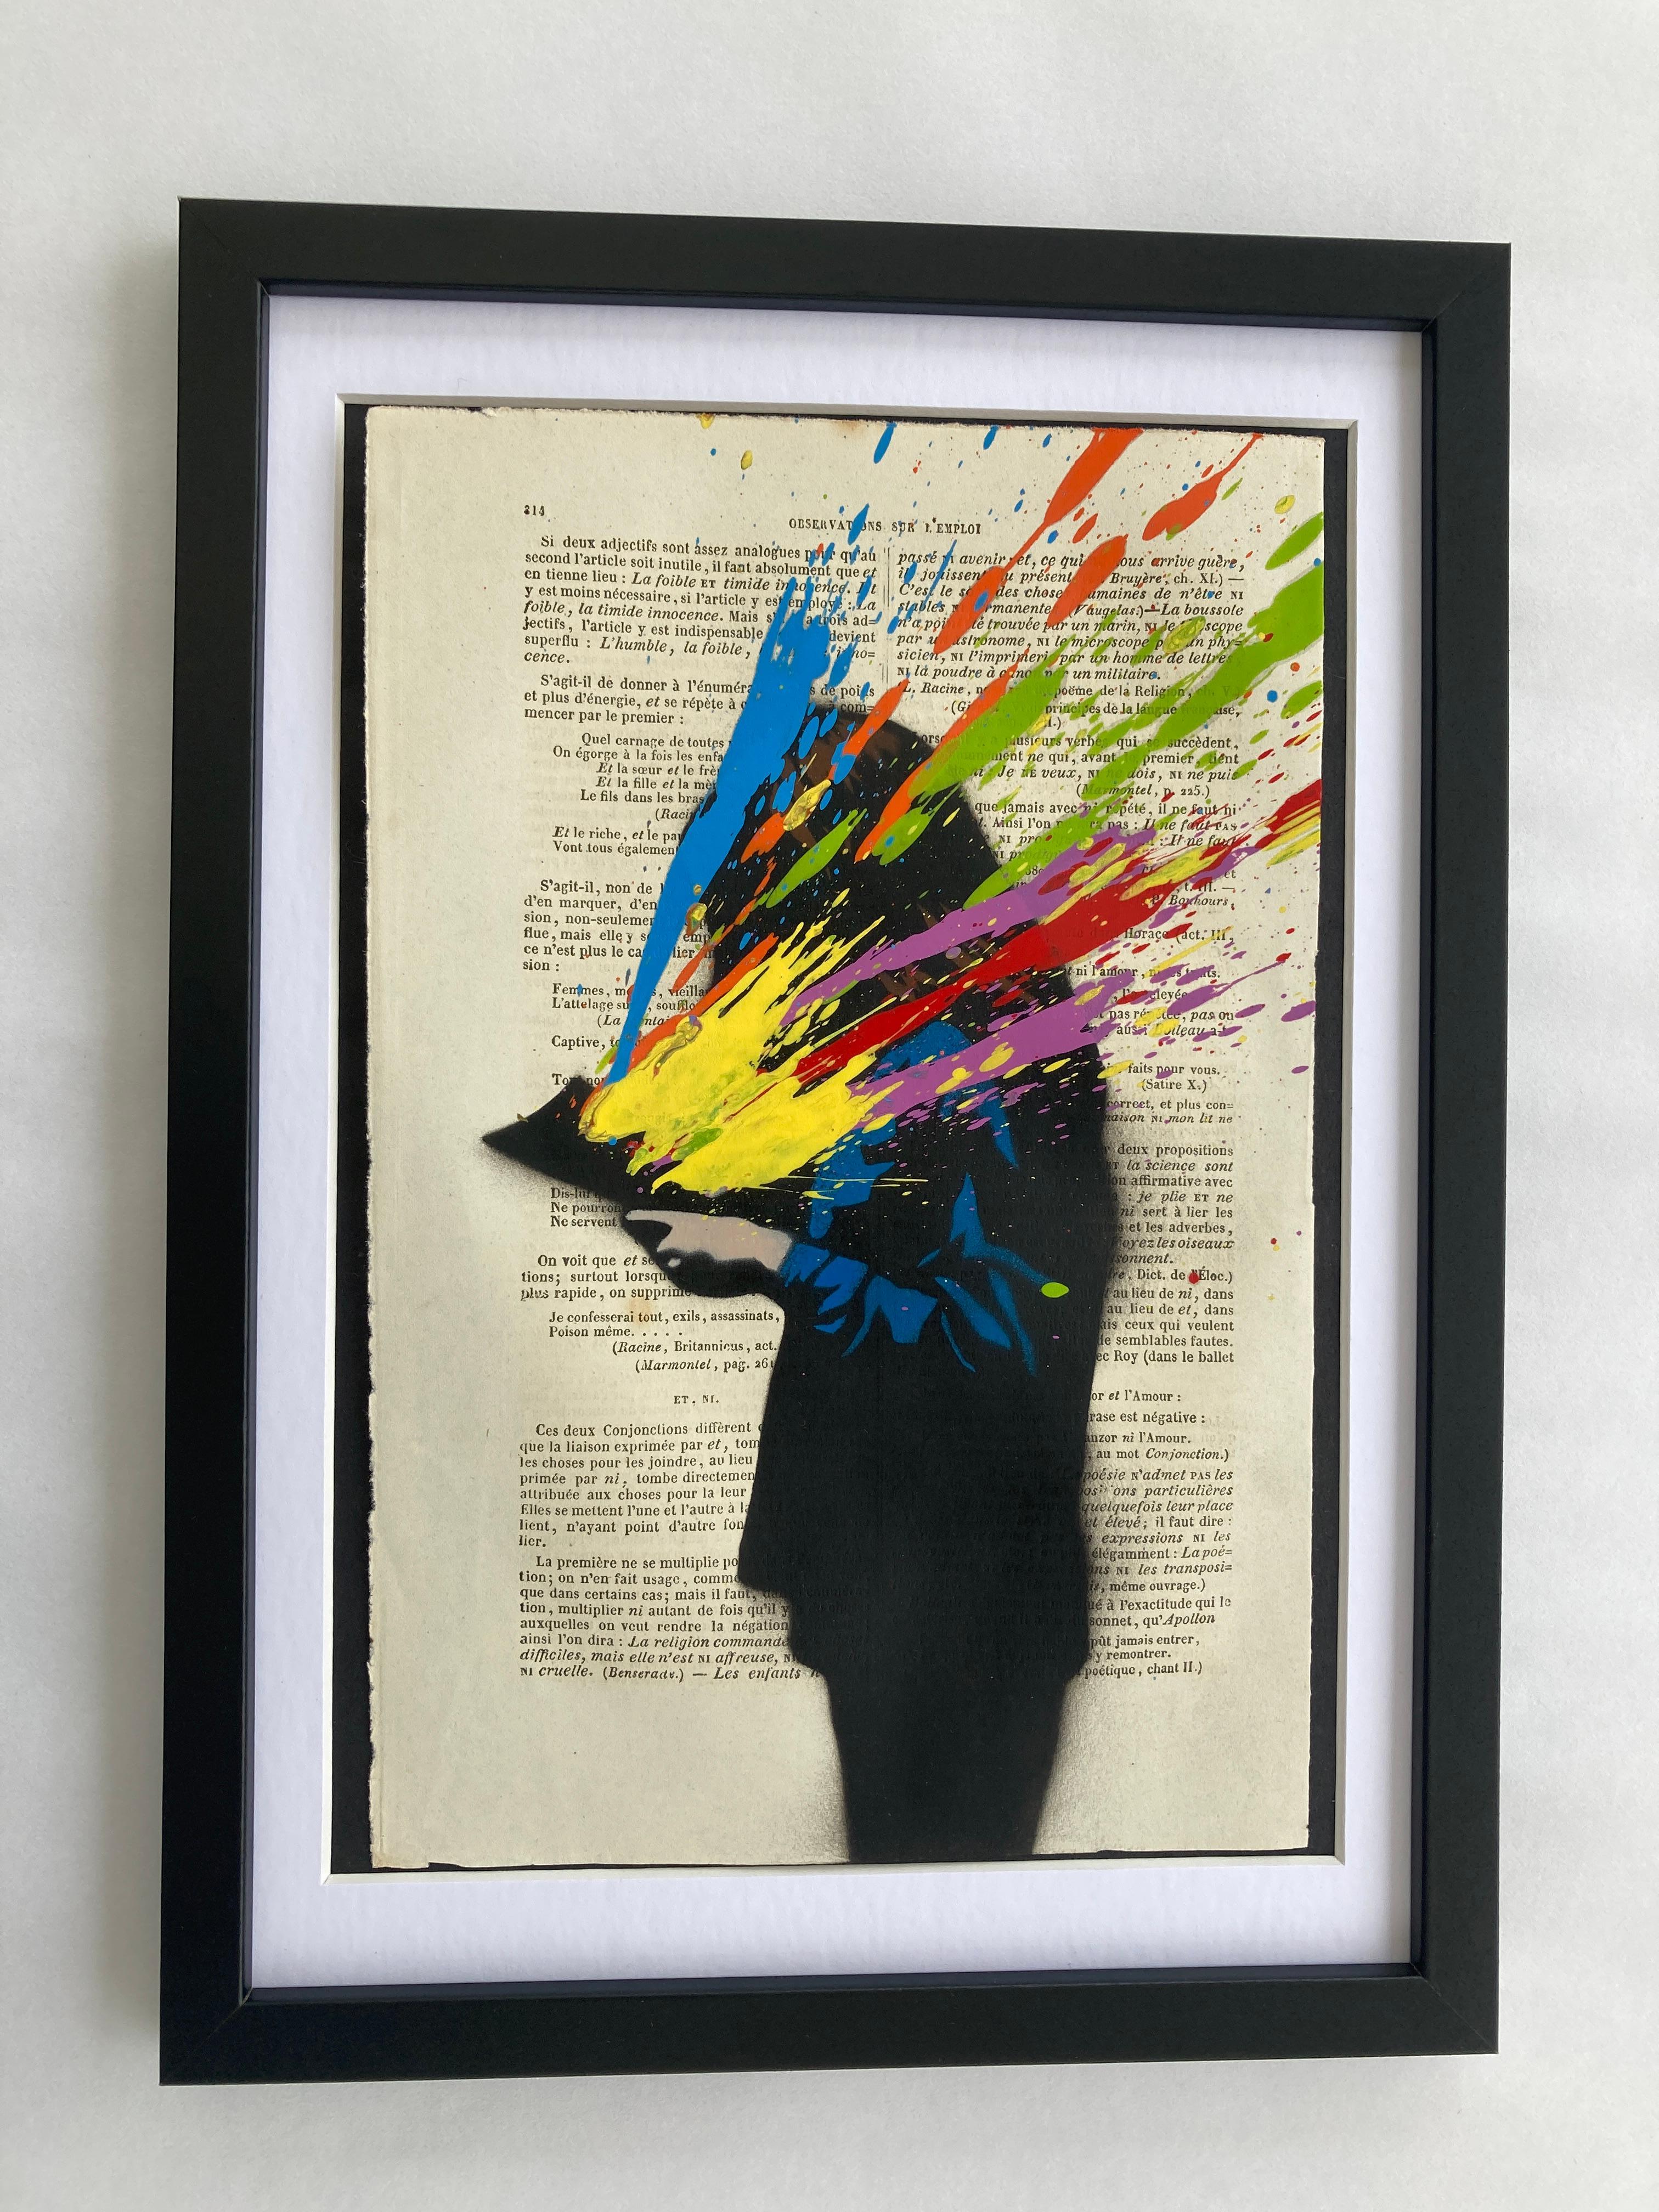 Edition version – Rainbow Splatter on a page from repurposed French grammar book - framed with custom mount.
Surface – French Grammar book page
Edition size – edition of 30
Size – 9.8 x 6.7" approximately
Year – 2023
Description – 8 color stencil